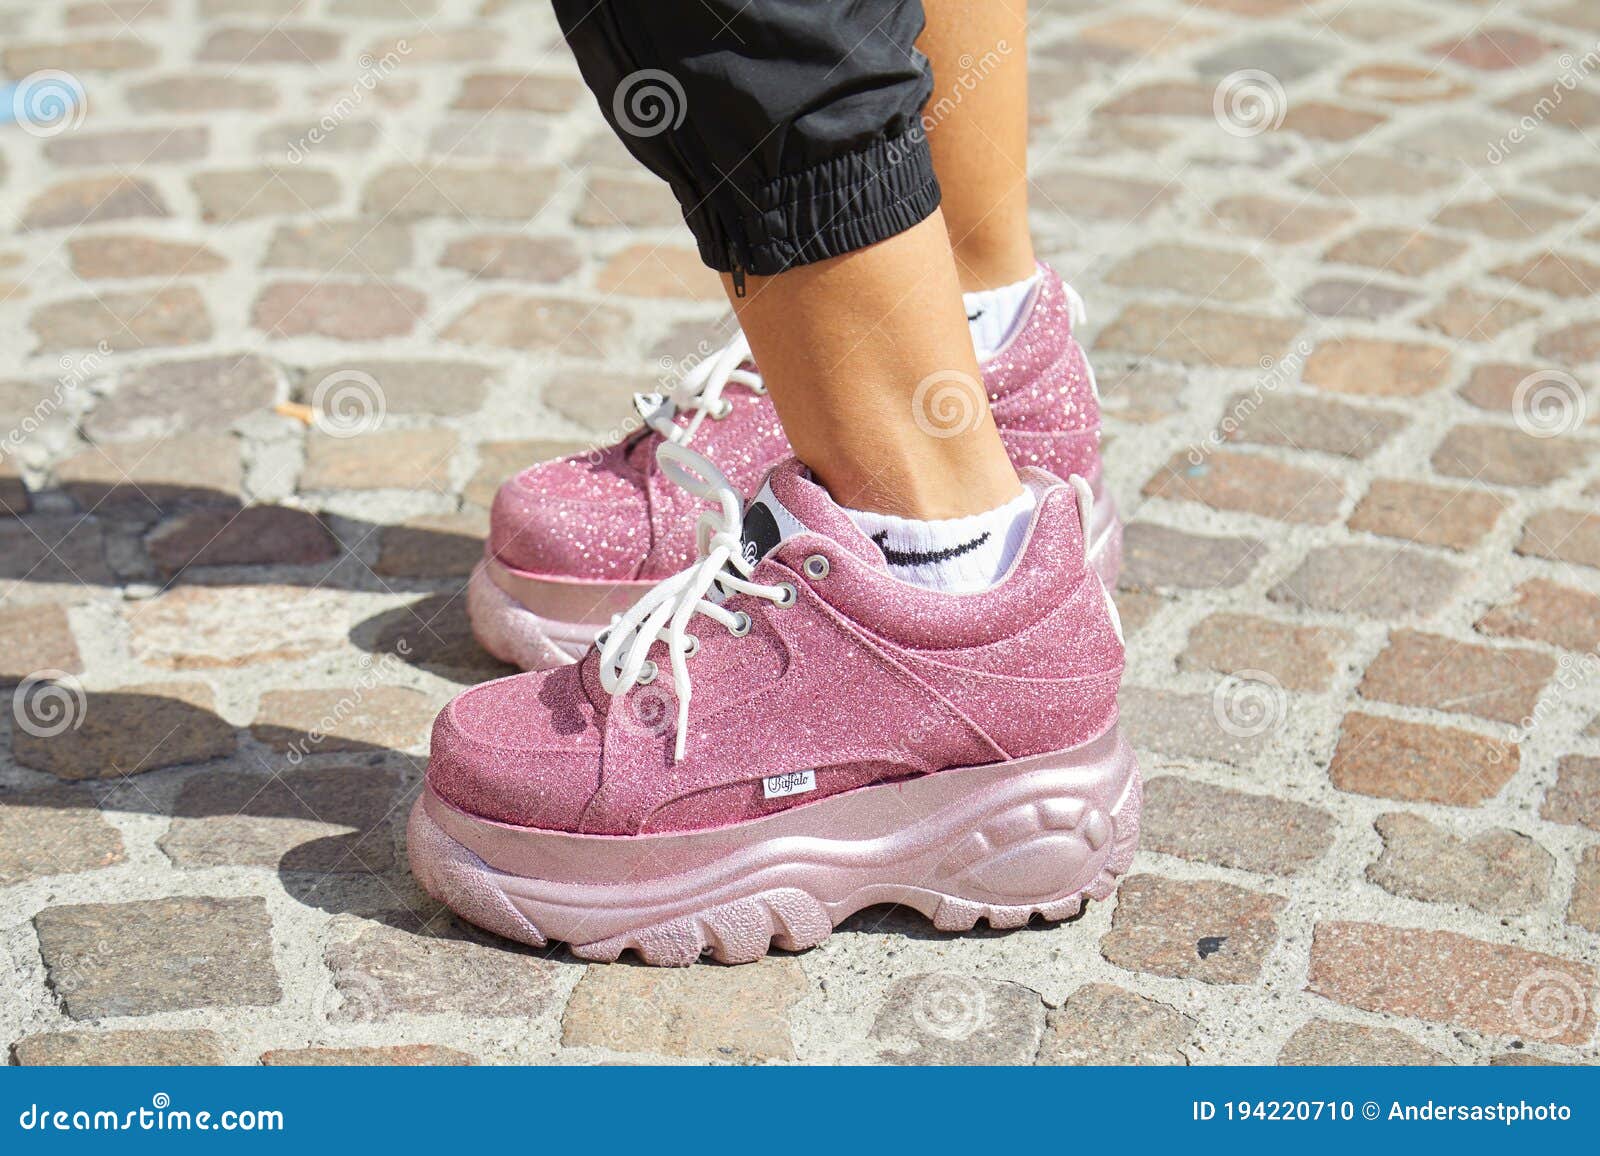 Extracción Congelar Necesito Woman with Pink Glitter Buffalo Sneakers and Nike Socks before Msgm Fashion  Show, Milan Fashion Editorial Image - Image of look, italy: 194220710